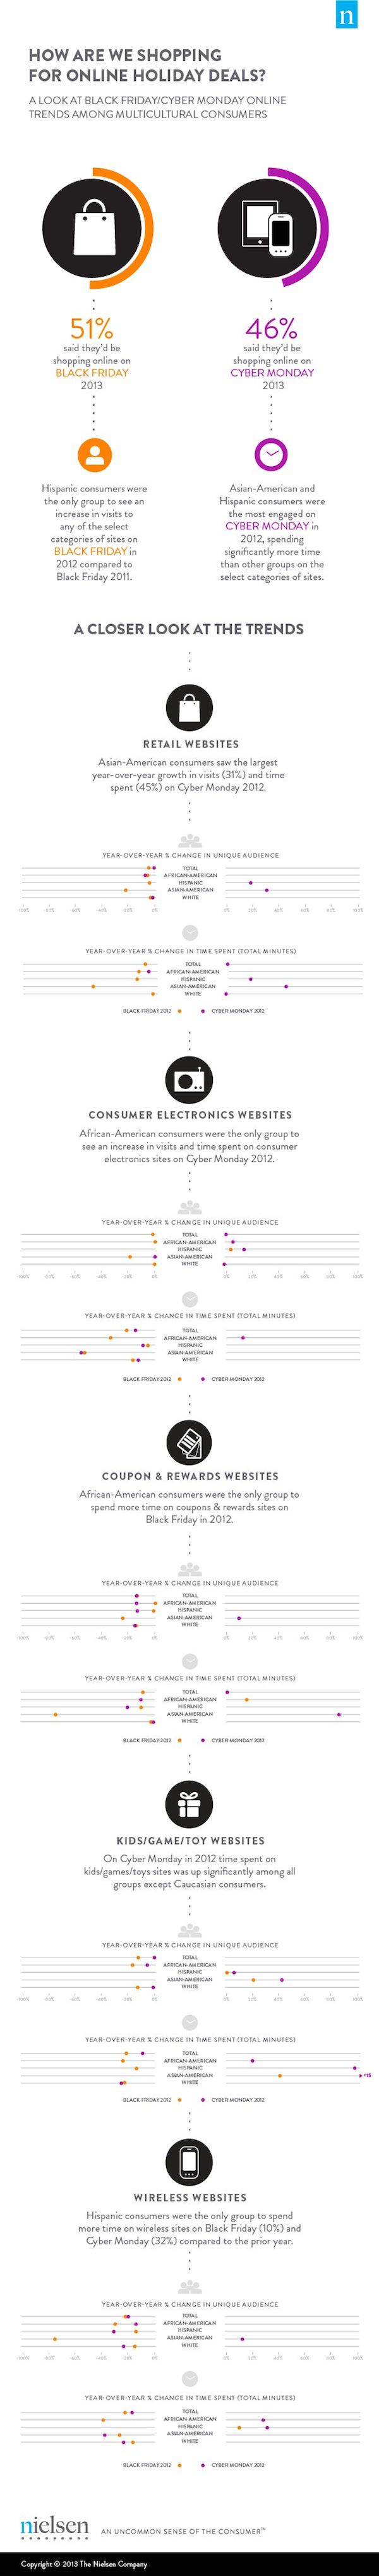 20 Black Friday And Cyber Monday Infographics image 101.jpg1